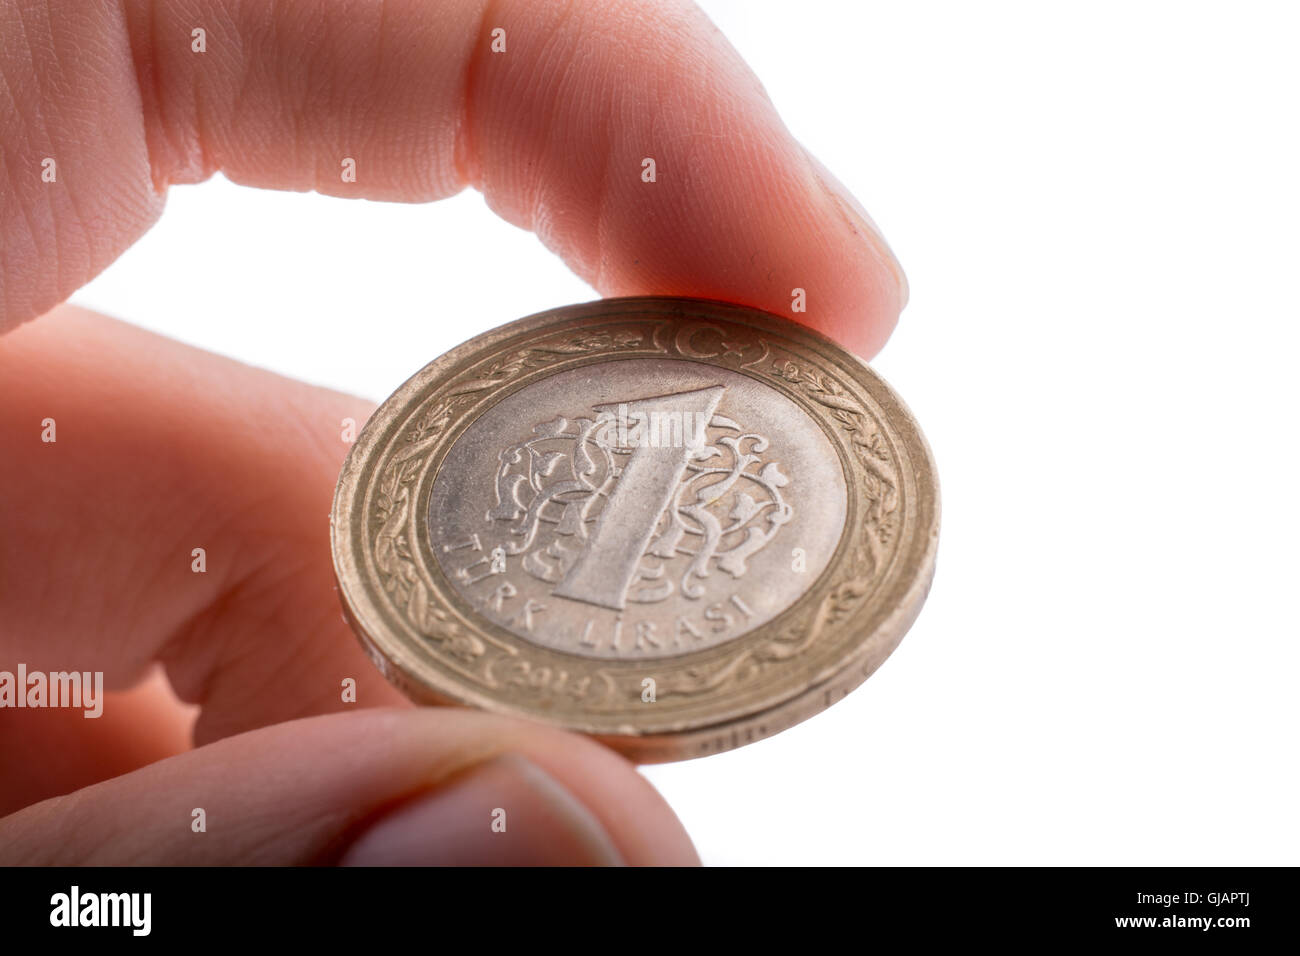 Turkish Currency coin in hand Stock Photo - Alamy